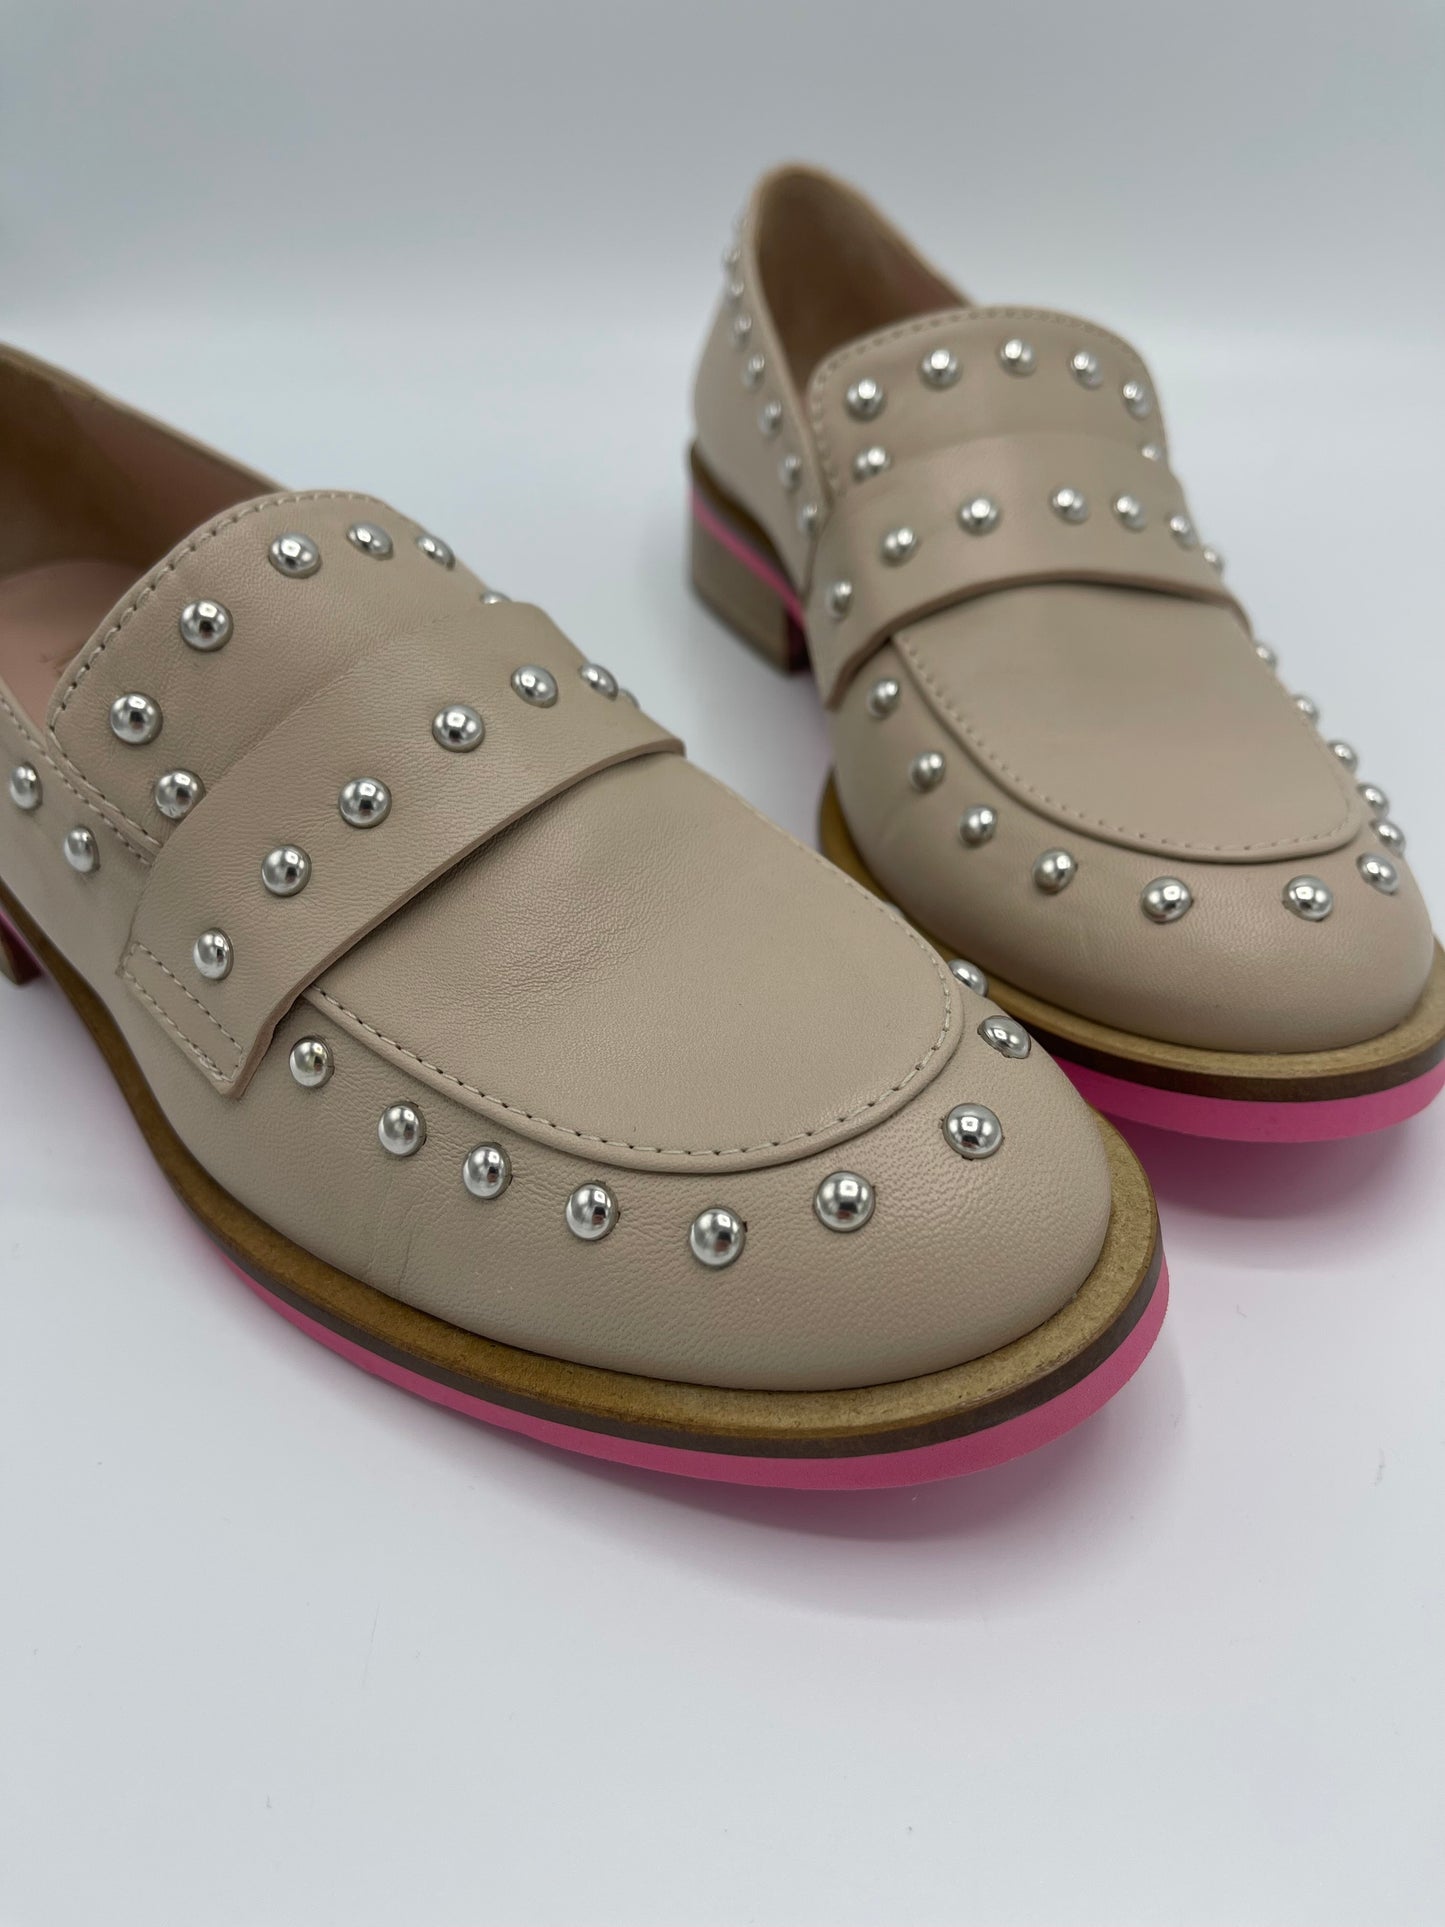 NAPPA BEIGE STUDDED LOAFER - MARCO MOREO